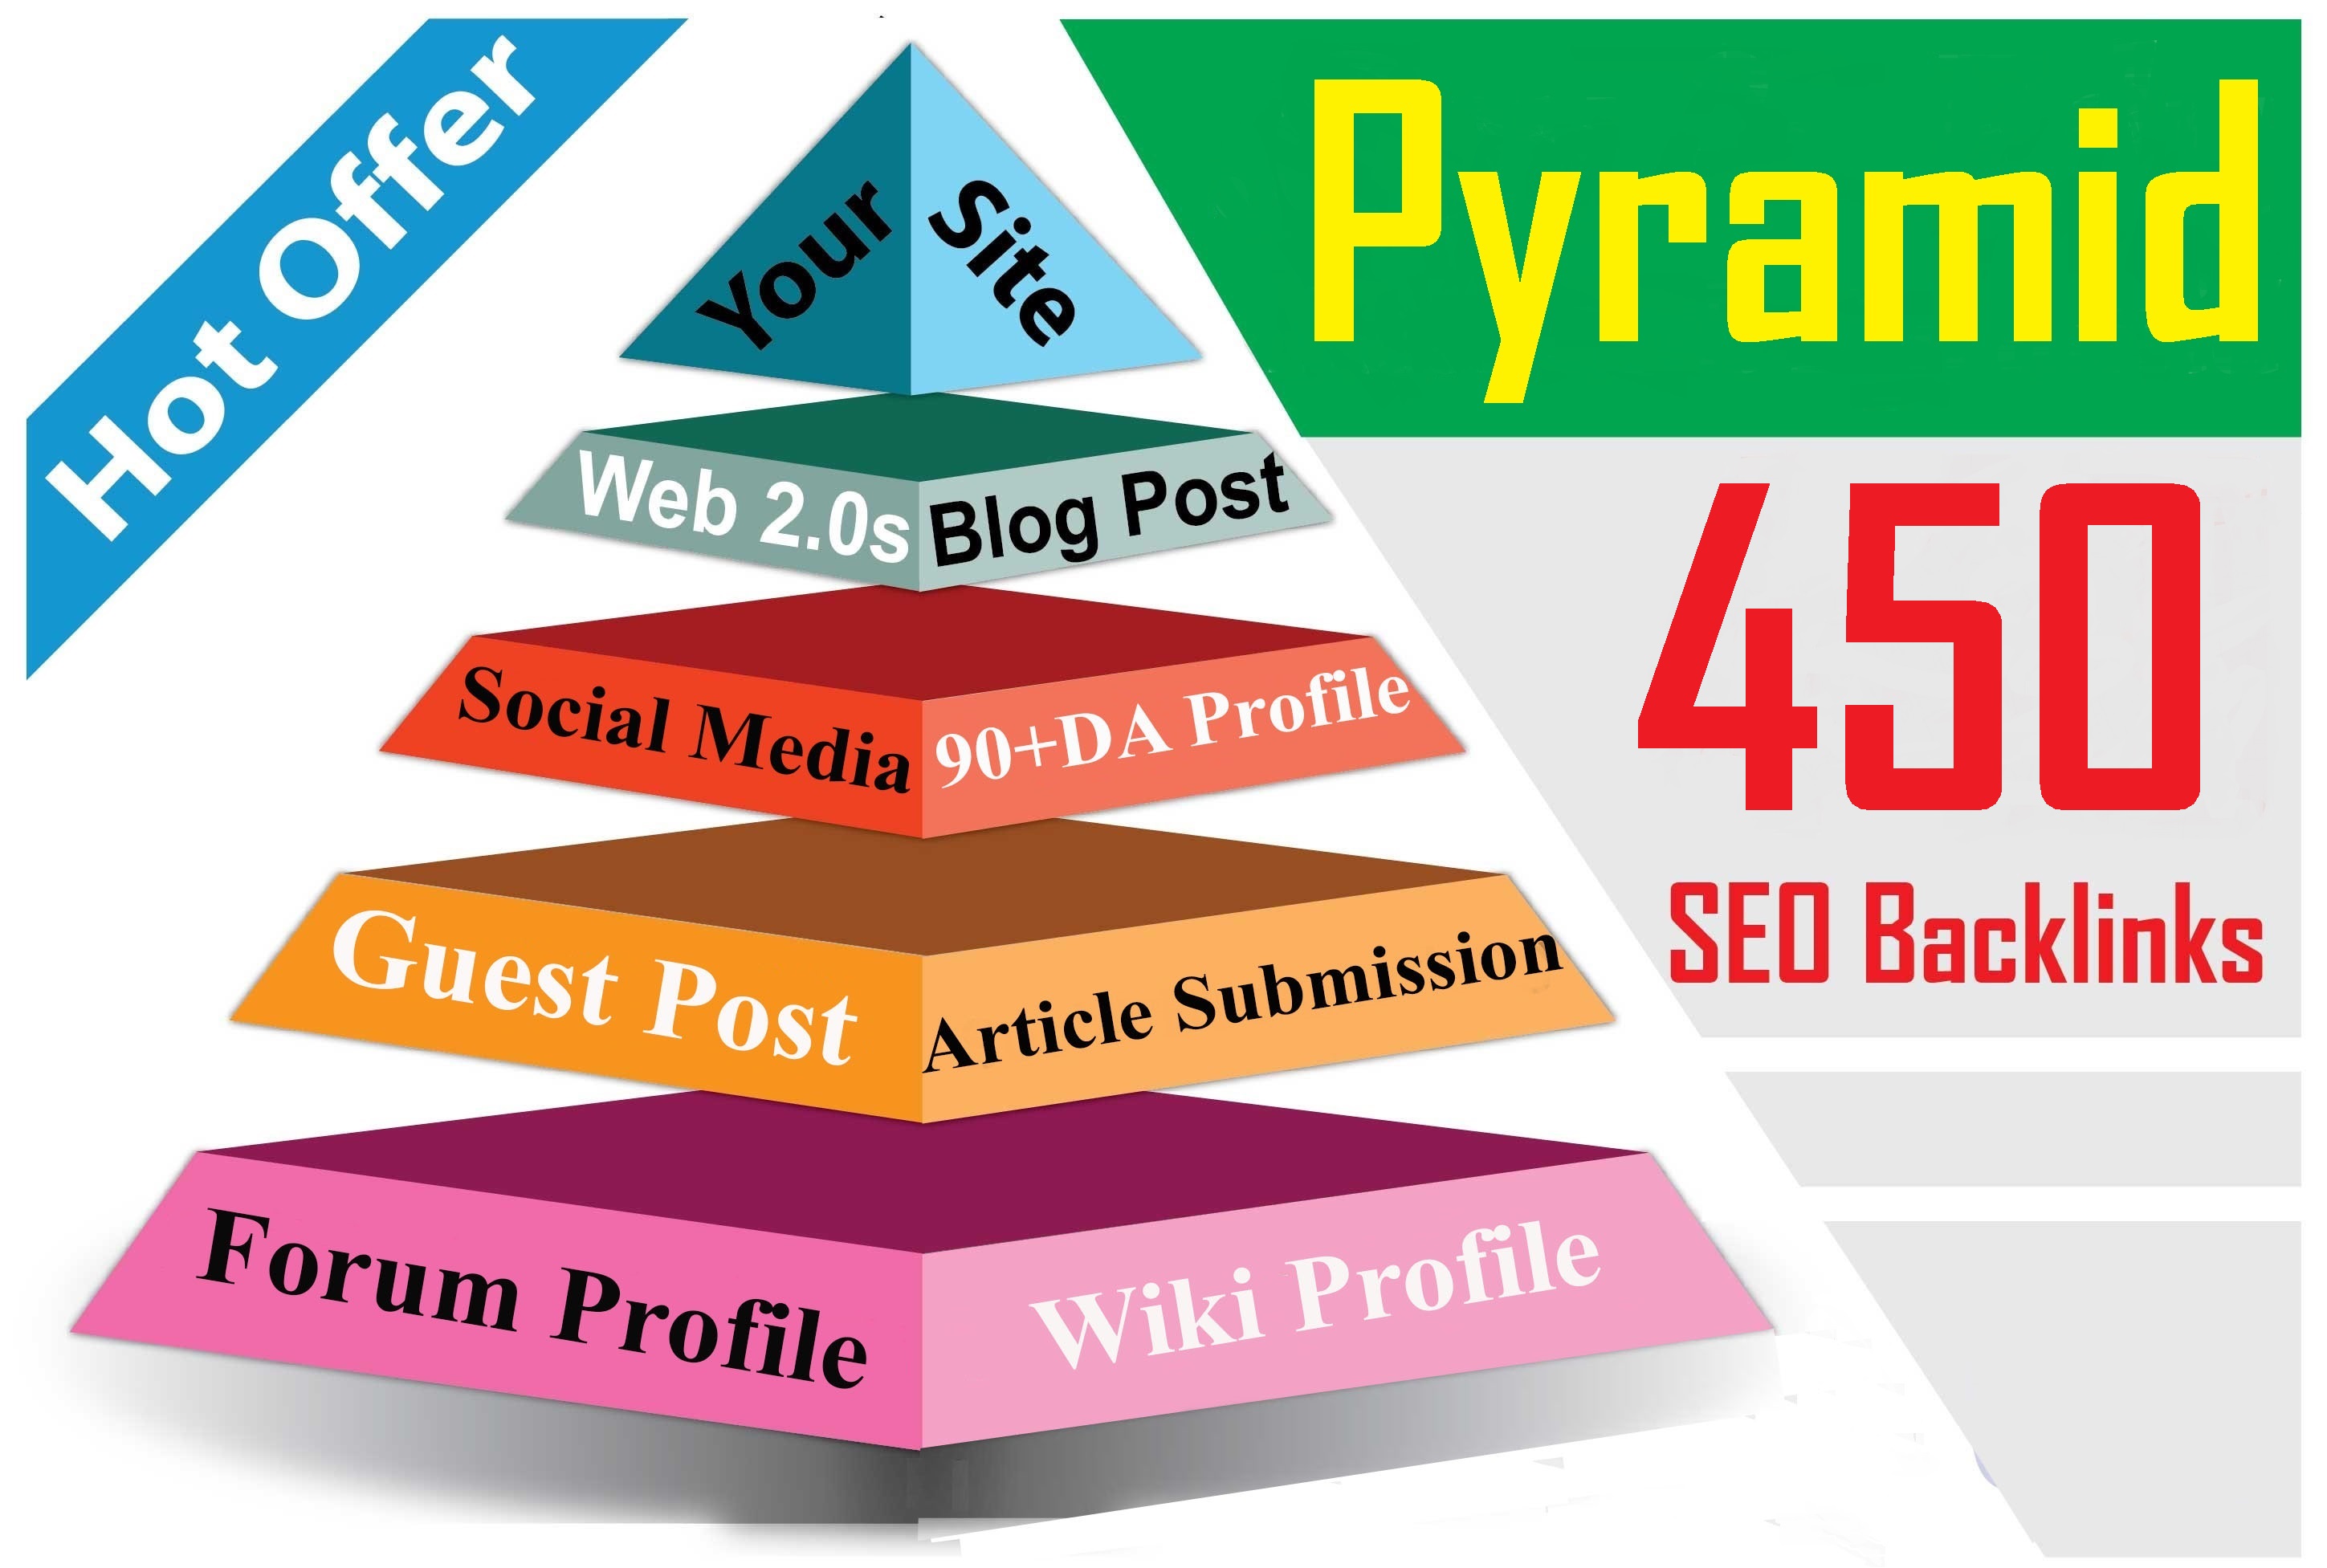 Powerfull SEO Package - Rank Boost On Top page exclusive Link Pyramid With High Authority Link-Build